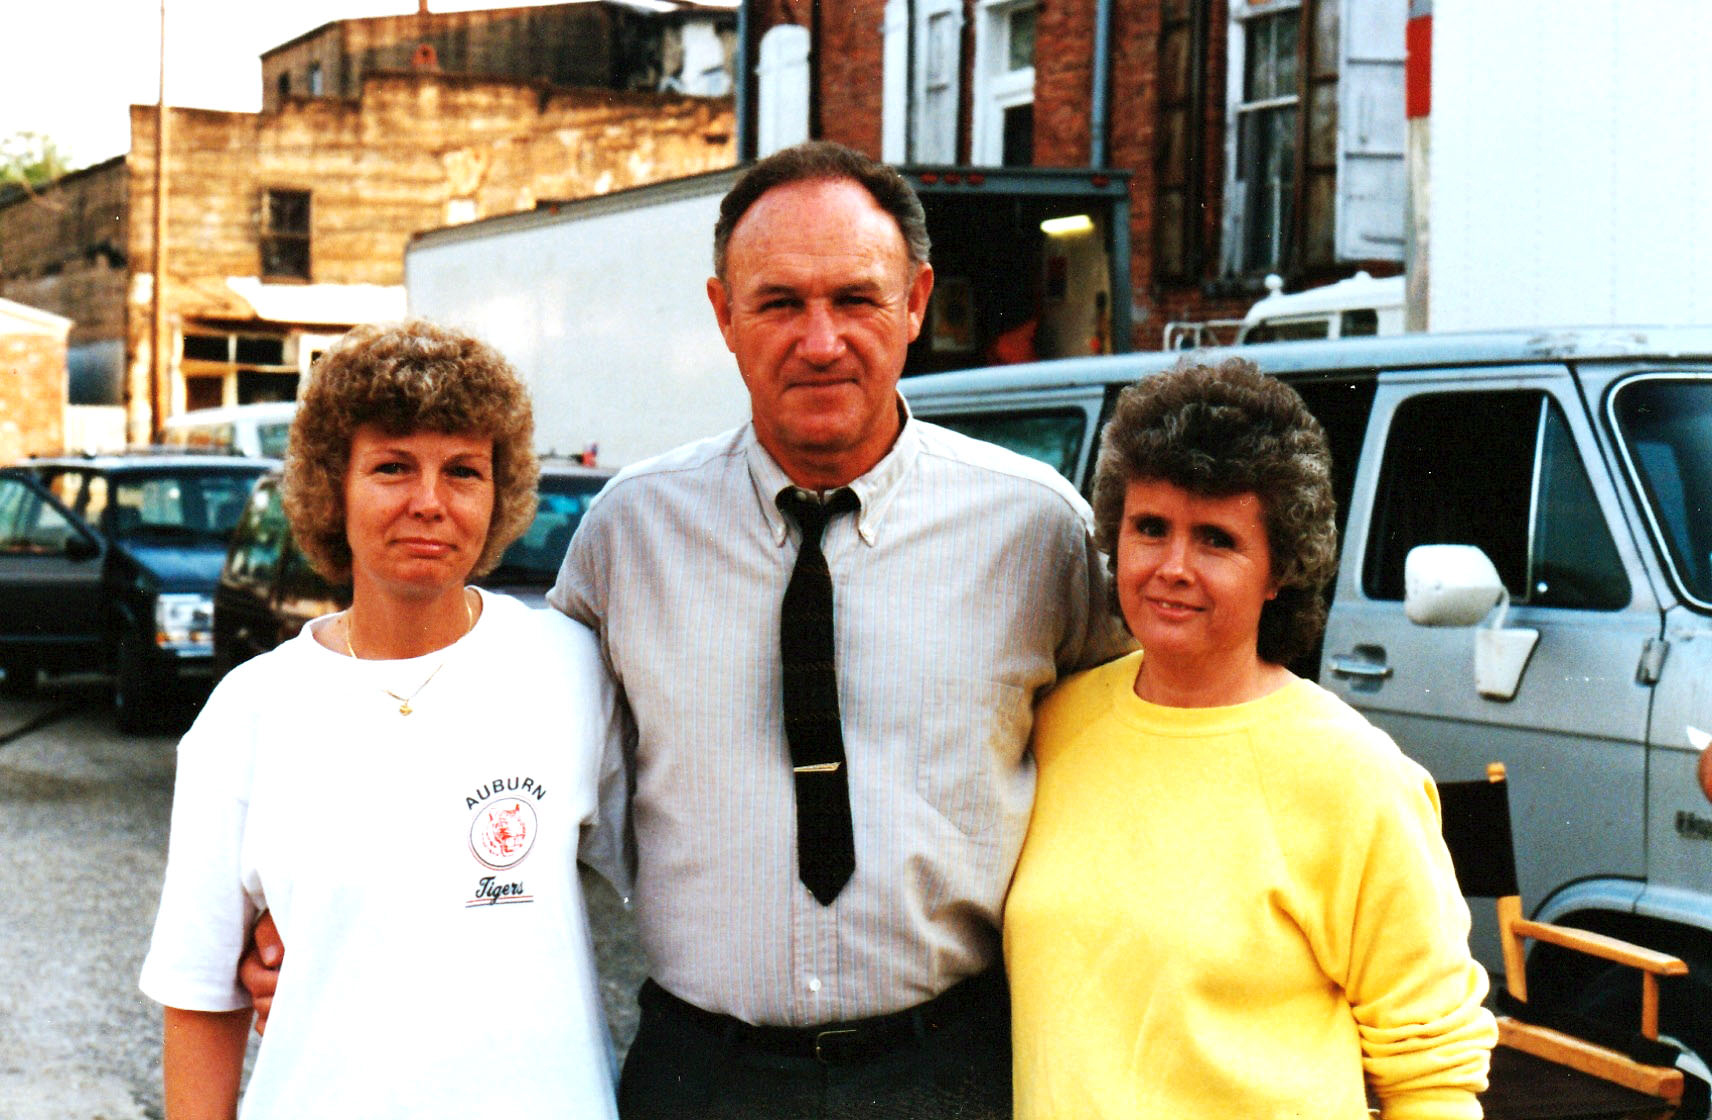 When “Mississippi Burning” was filming in LaFayette, my aunt Linda Davis and my mother Brenda Potts met Gene Hackman during one of his breaks from filming. SUBMITTED by Regina Sanders, Lanett.